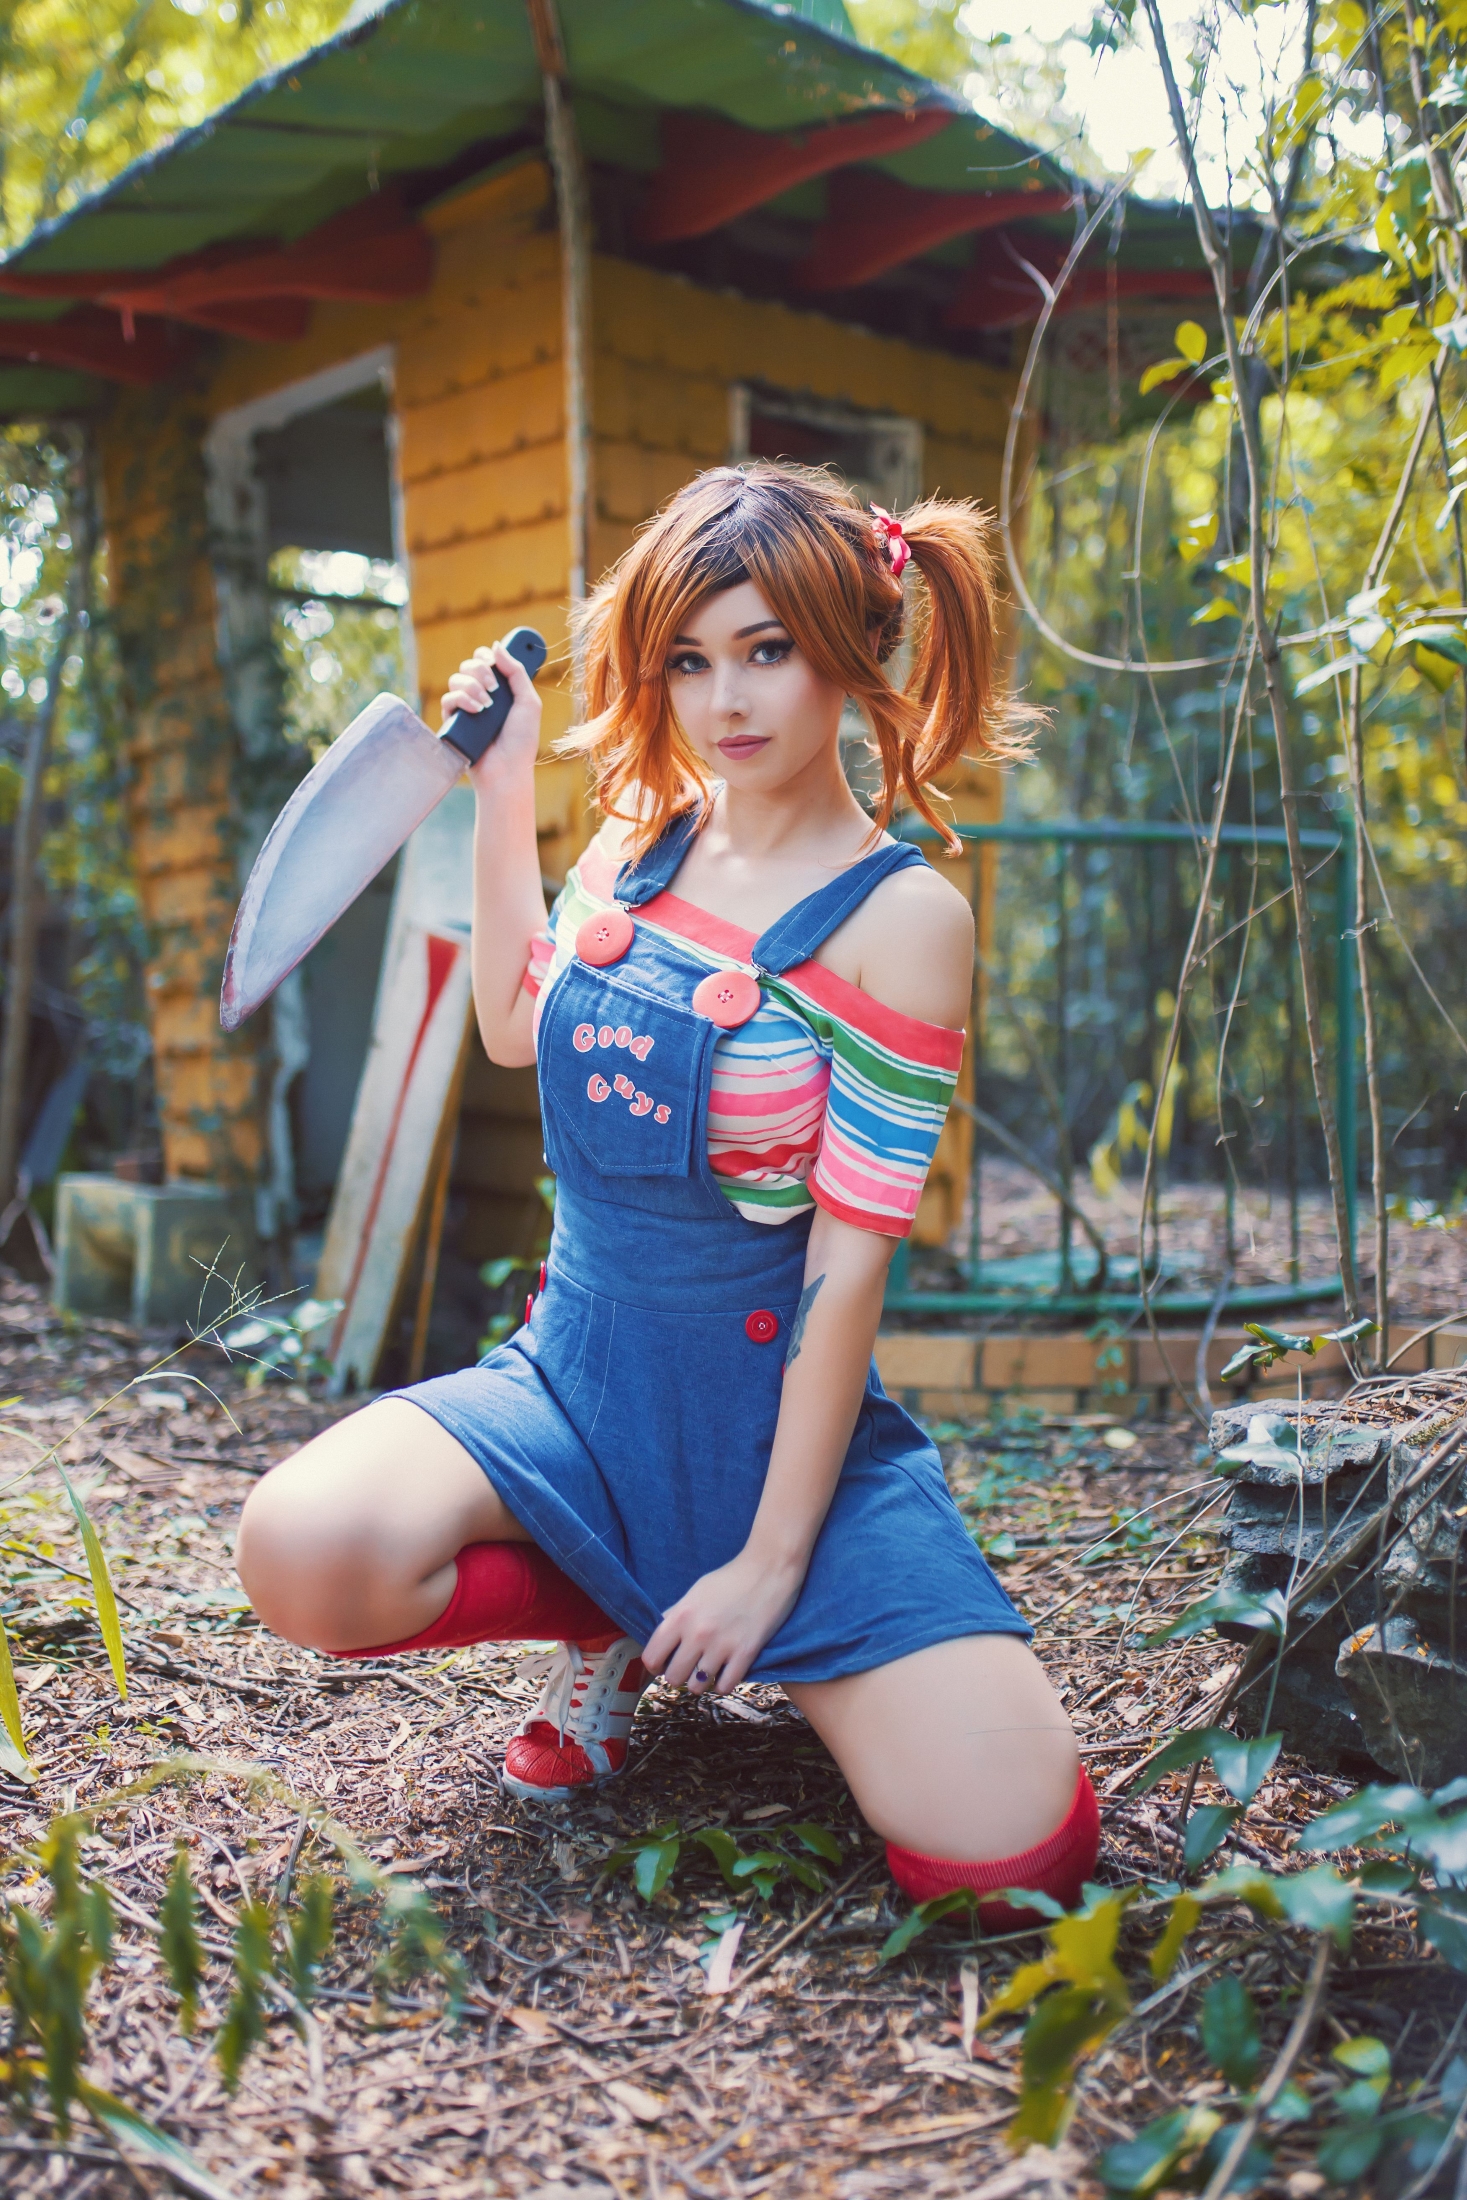 Women Model Dyed Hair Looking At Viewer Cosplay Chucky Sneakers Knee Highs Overalls Women Outdoors S 1467x2200